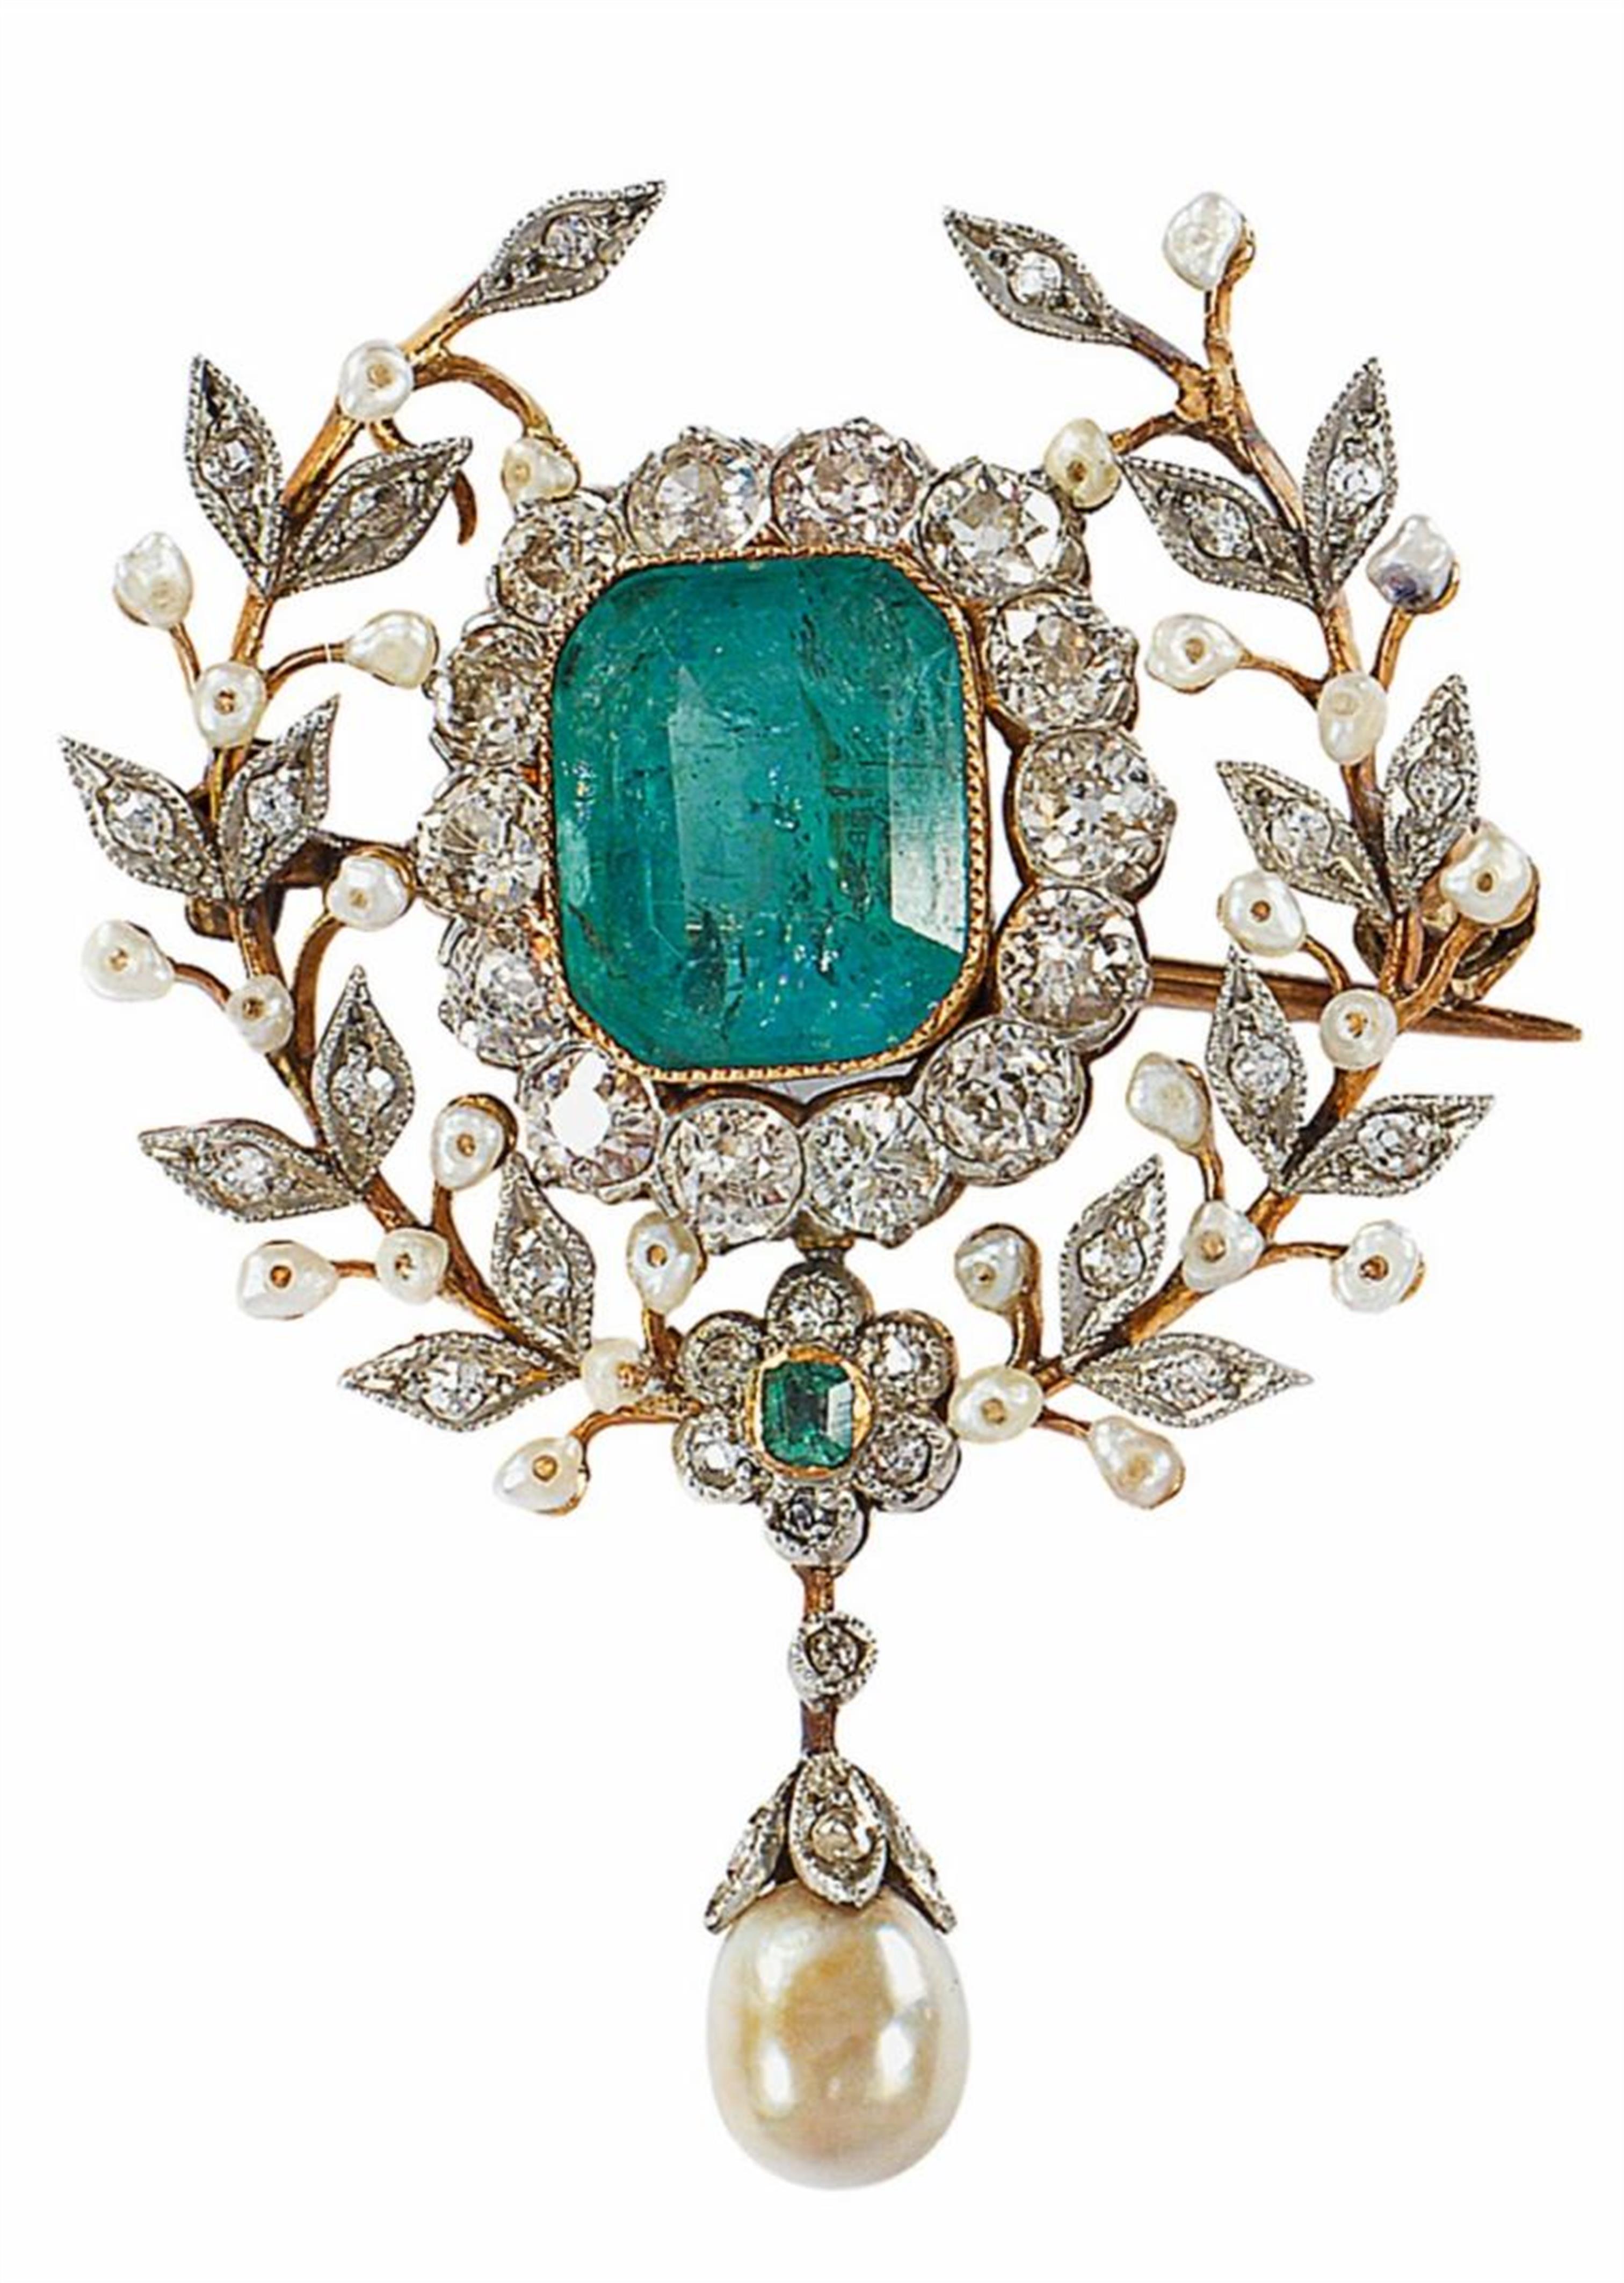 A 14k gold and emerald Belle Epoque brooch - image-1